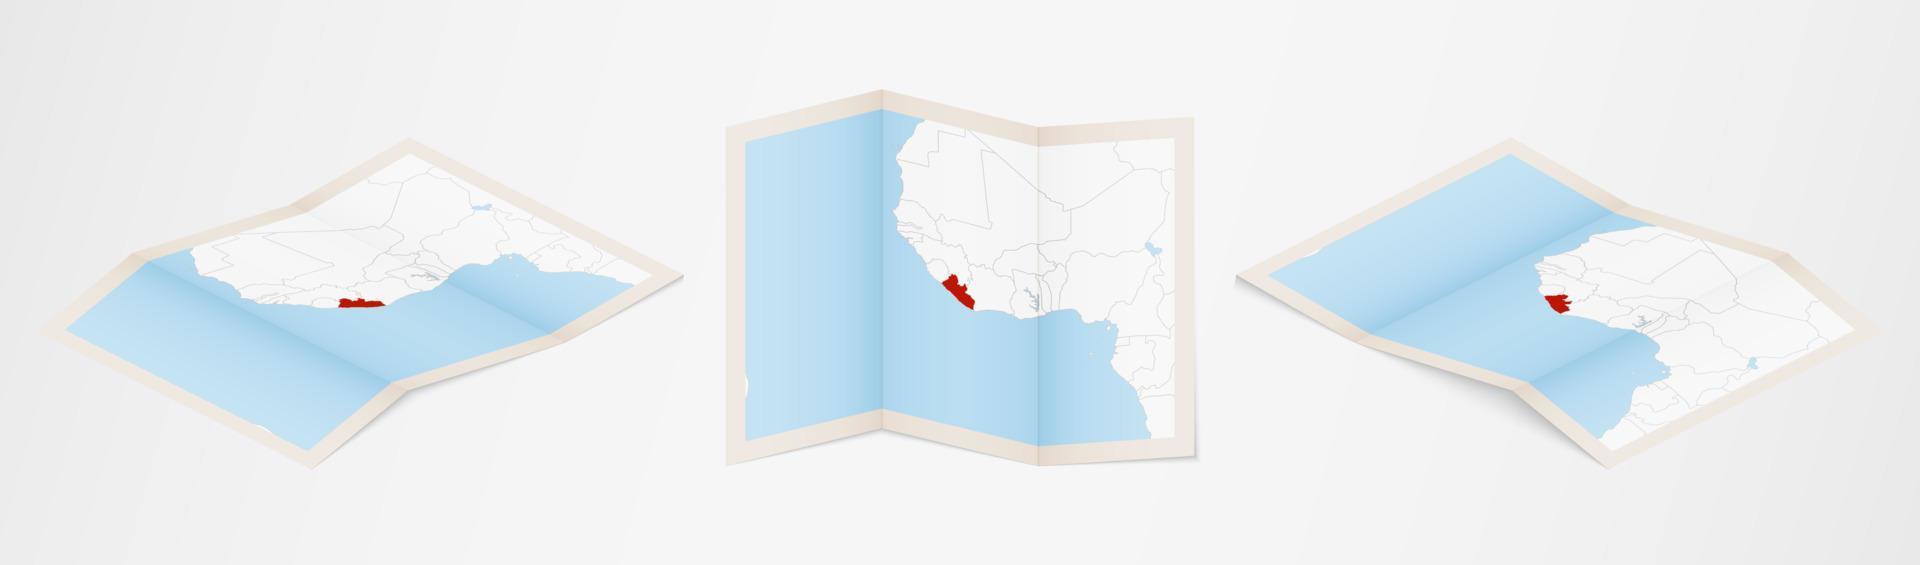 Folded map of Liberia in three different versions. vector